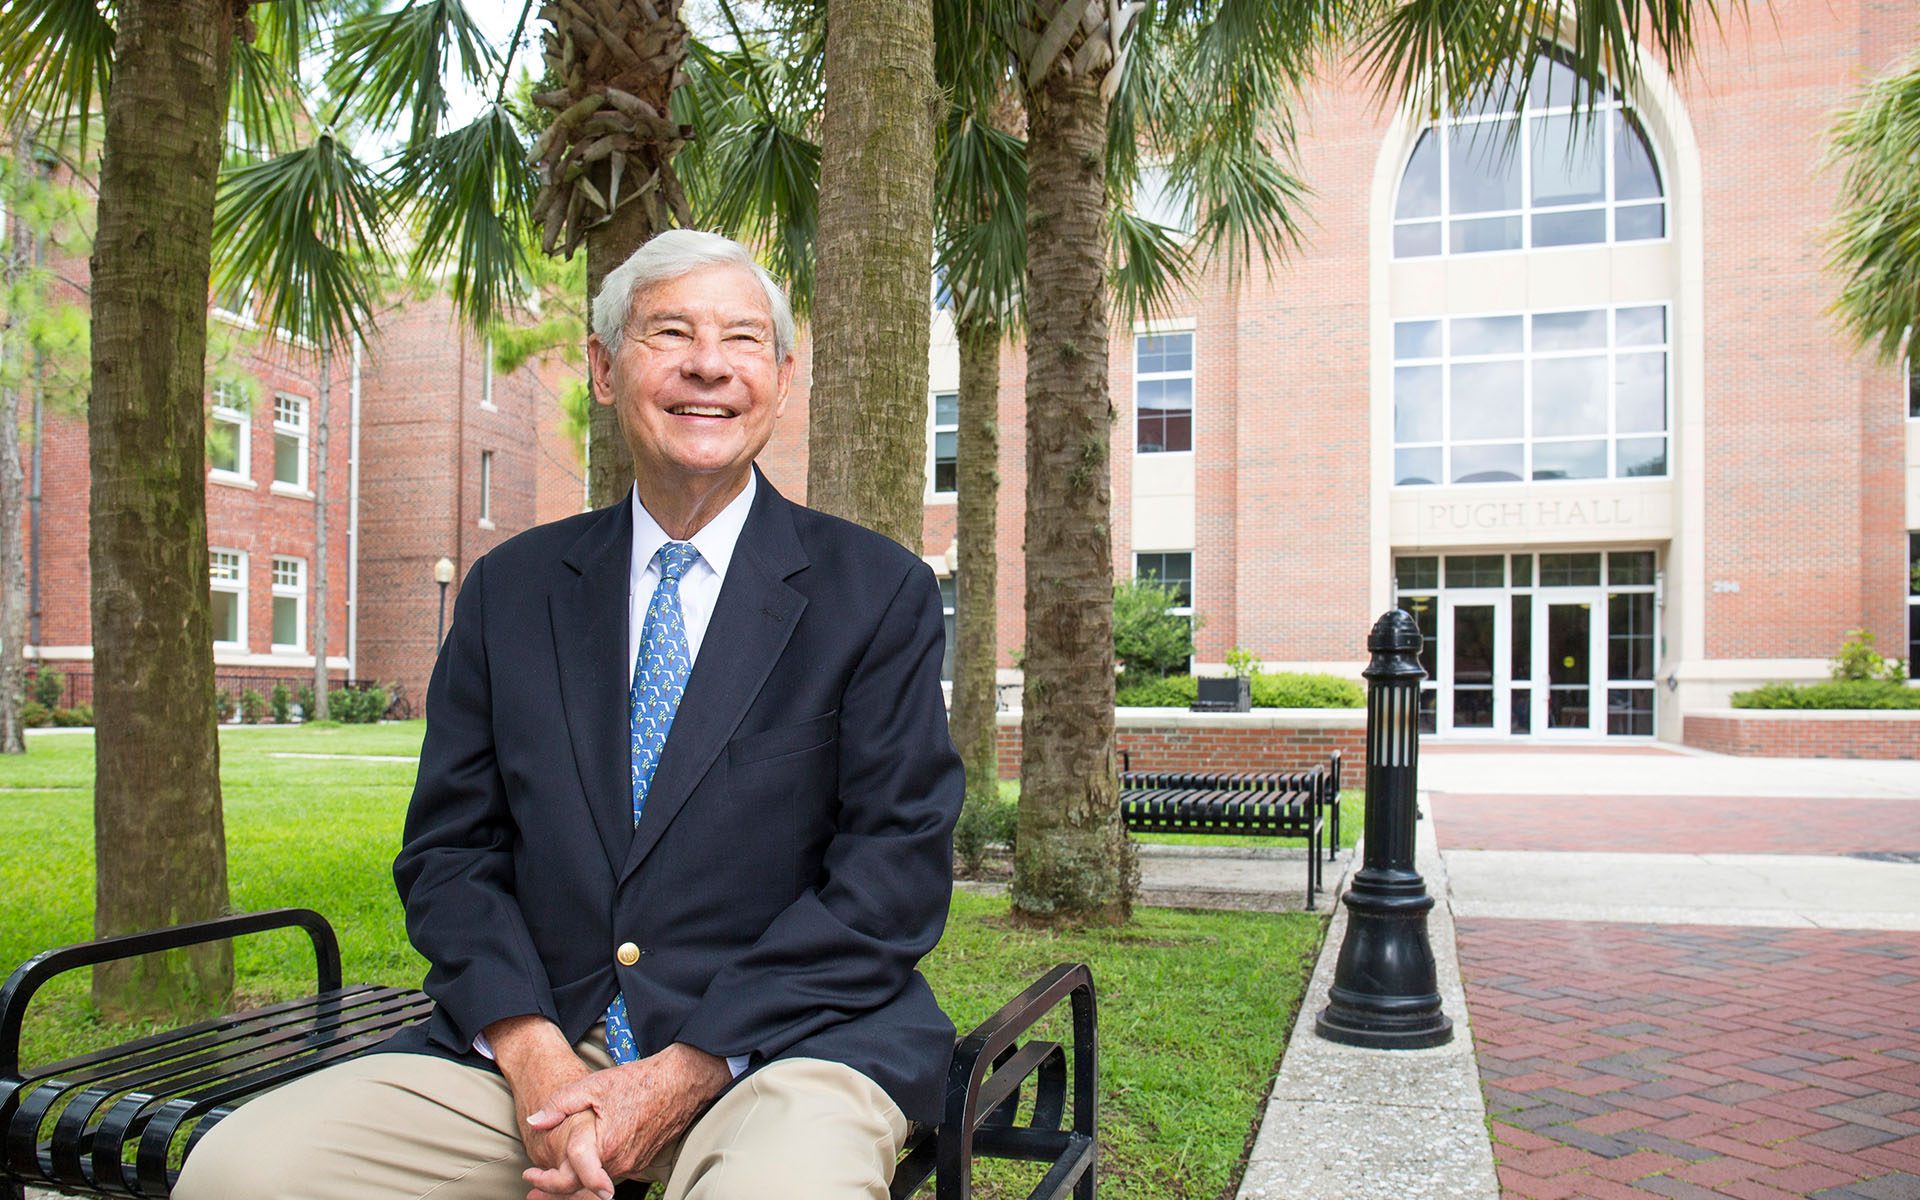 smiling grandfatherly man in suit sits on bench outside statuesque collegiate building